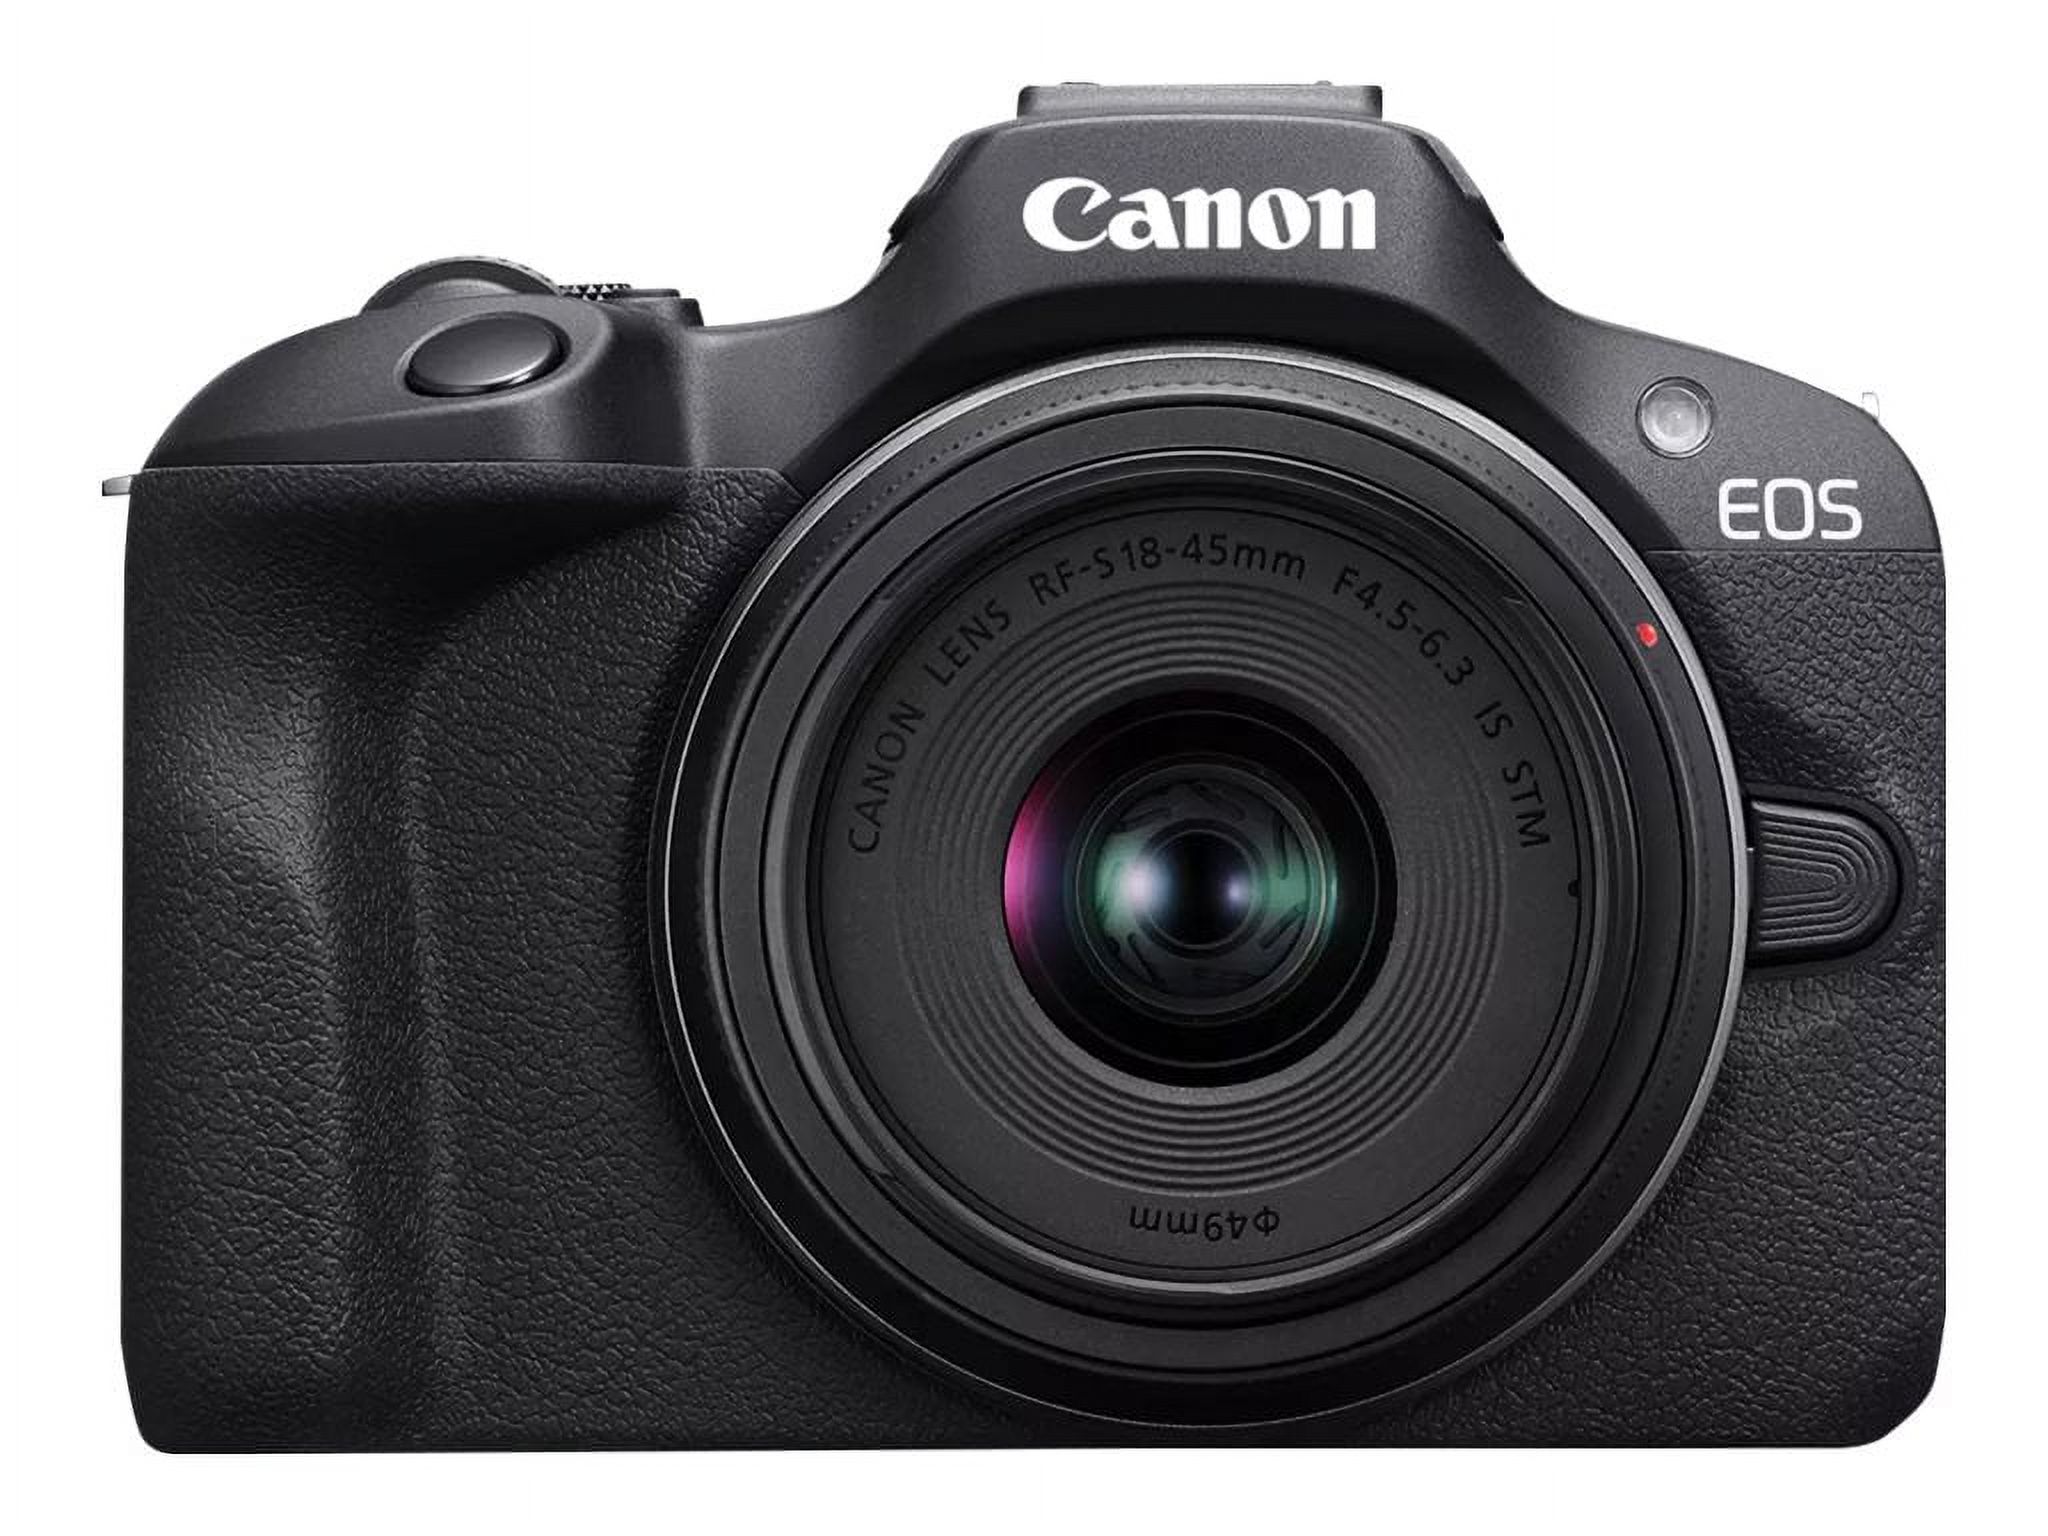 Canon EOS R100 - Mirrorless Camera - 24.1 MP - APS-C - 4K / 29.97 fps - 2.5x optical zoom RF-S 18-45mm F4.5-6.3 IS STM lens - Wi-Fi, Bluetooth - black - image 1 of 12